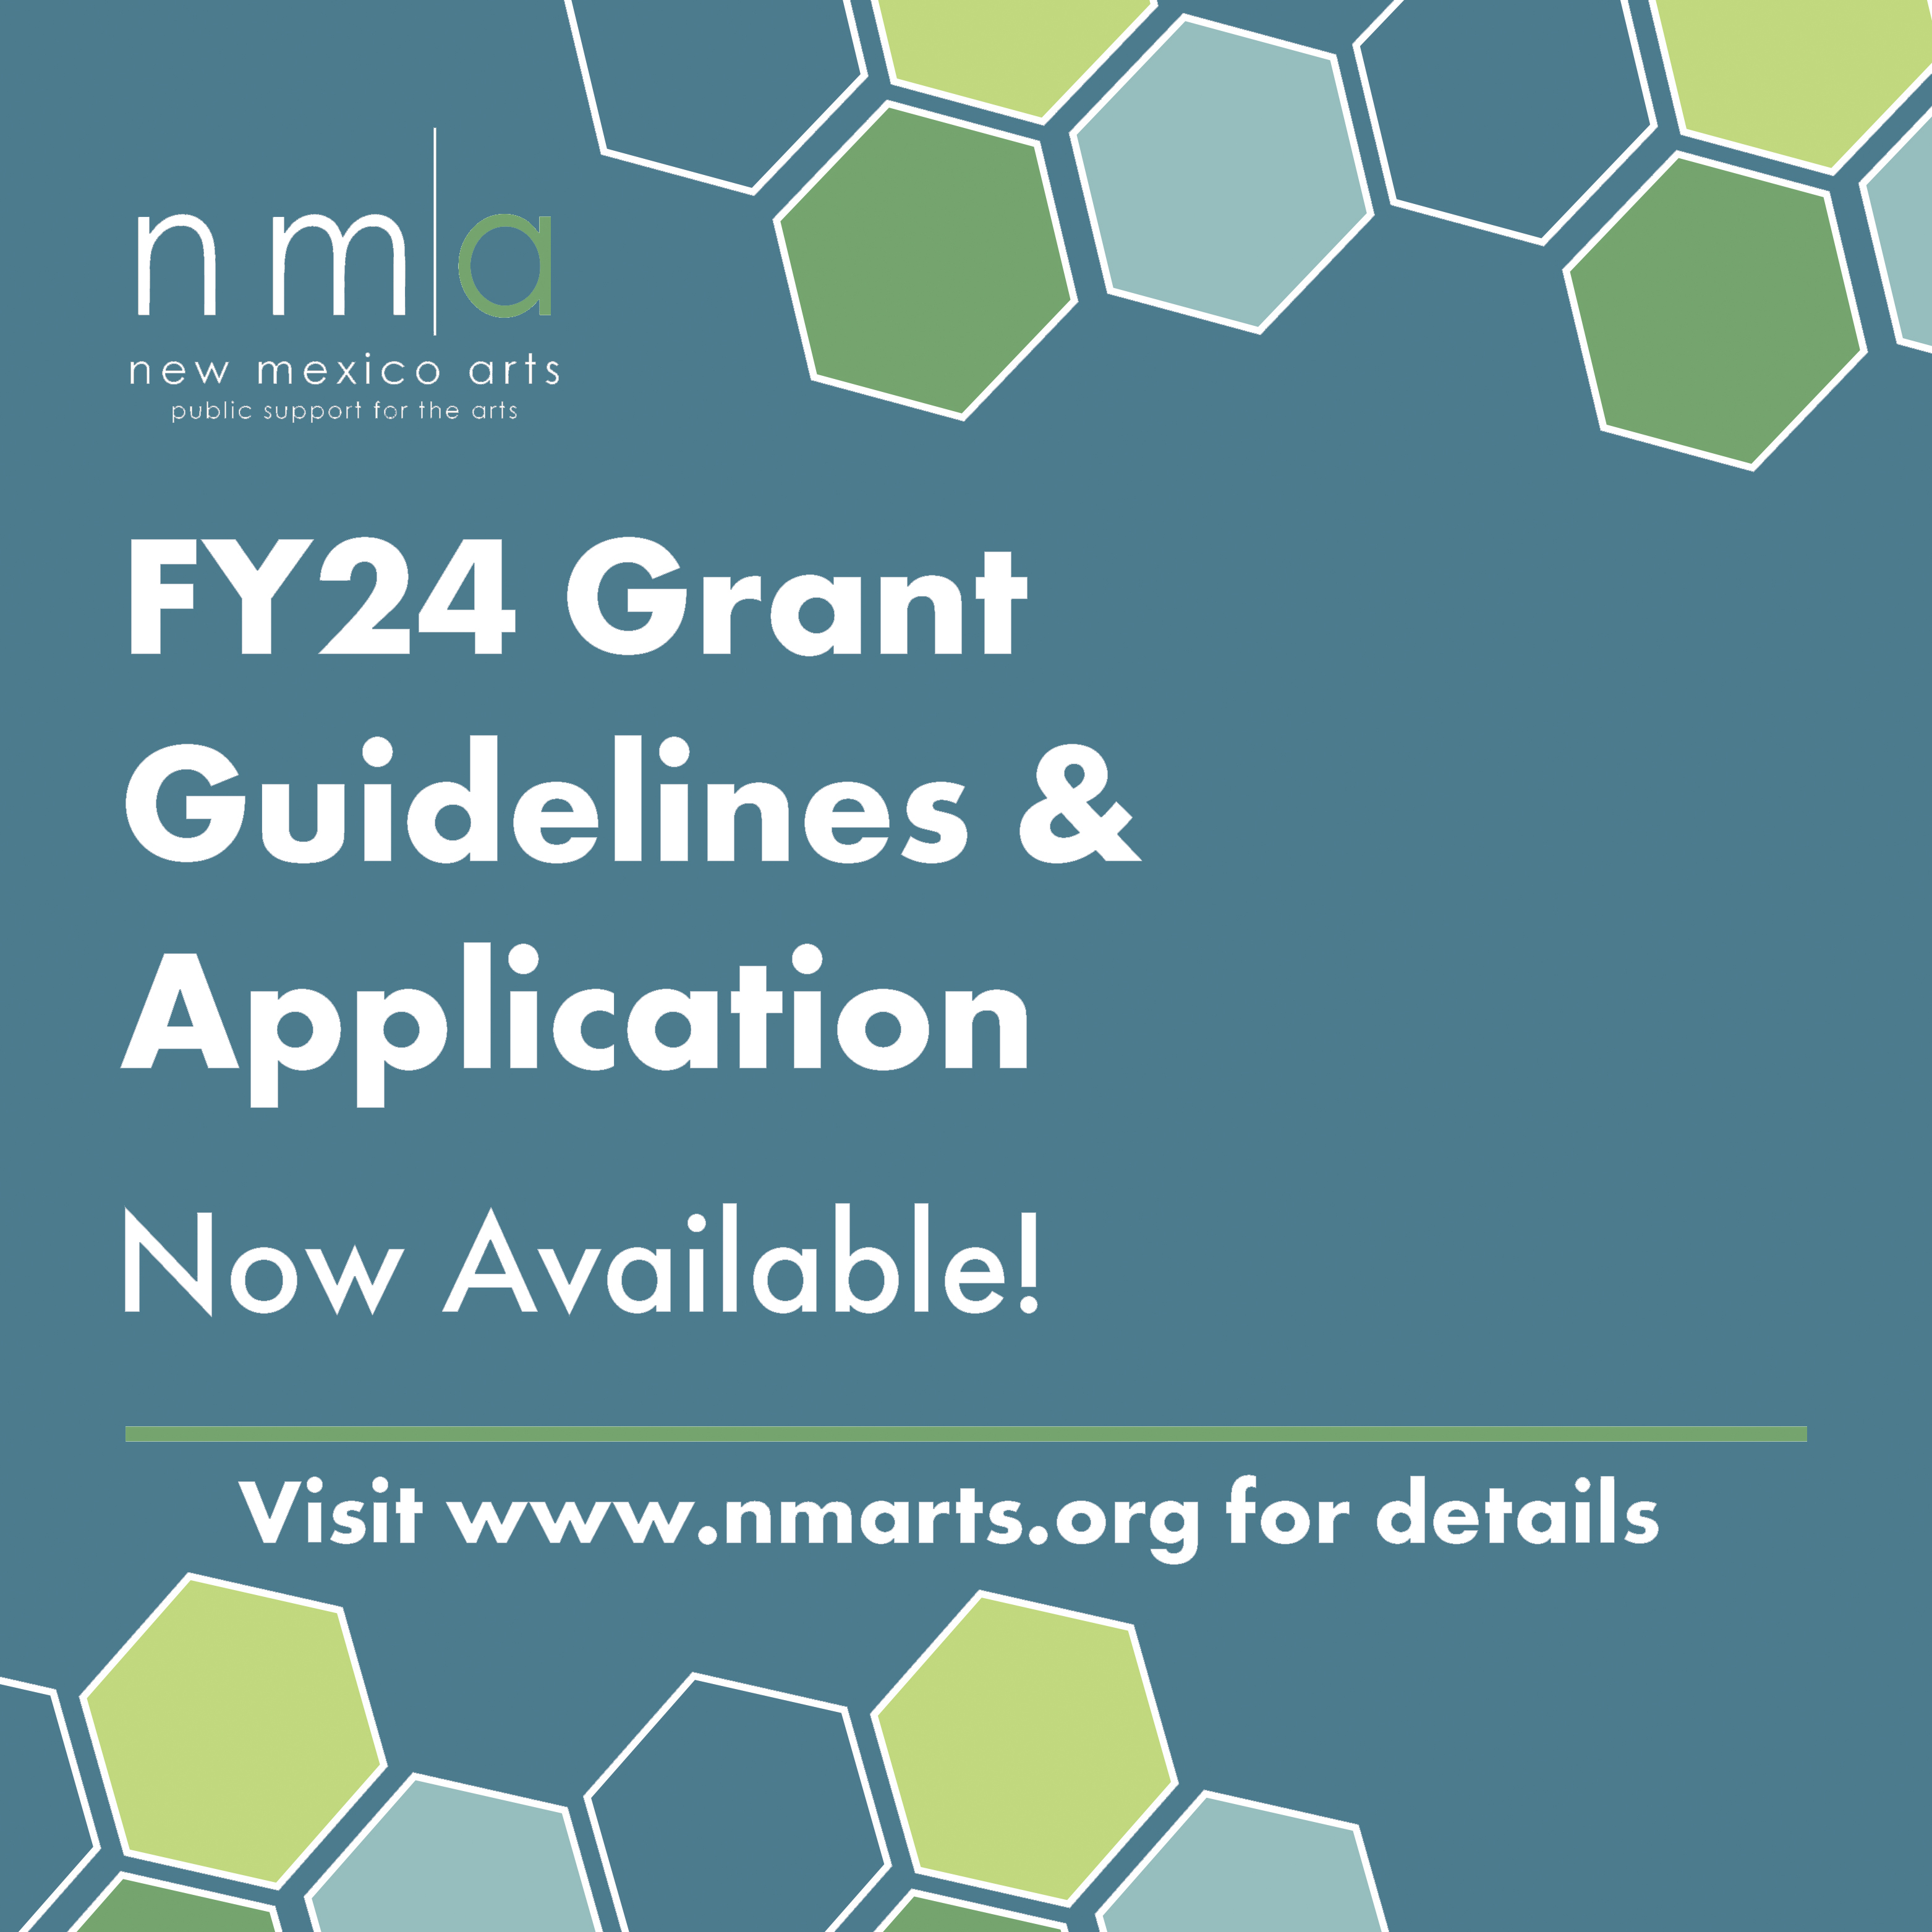 FY24 Grant Guidelines & Application are now available. Visit www.nmarts.org for details.